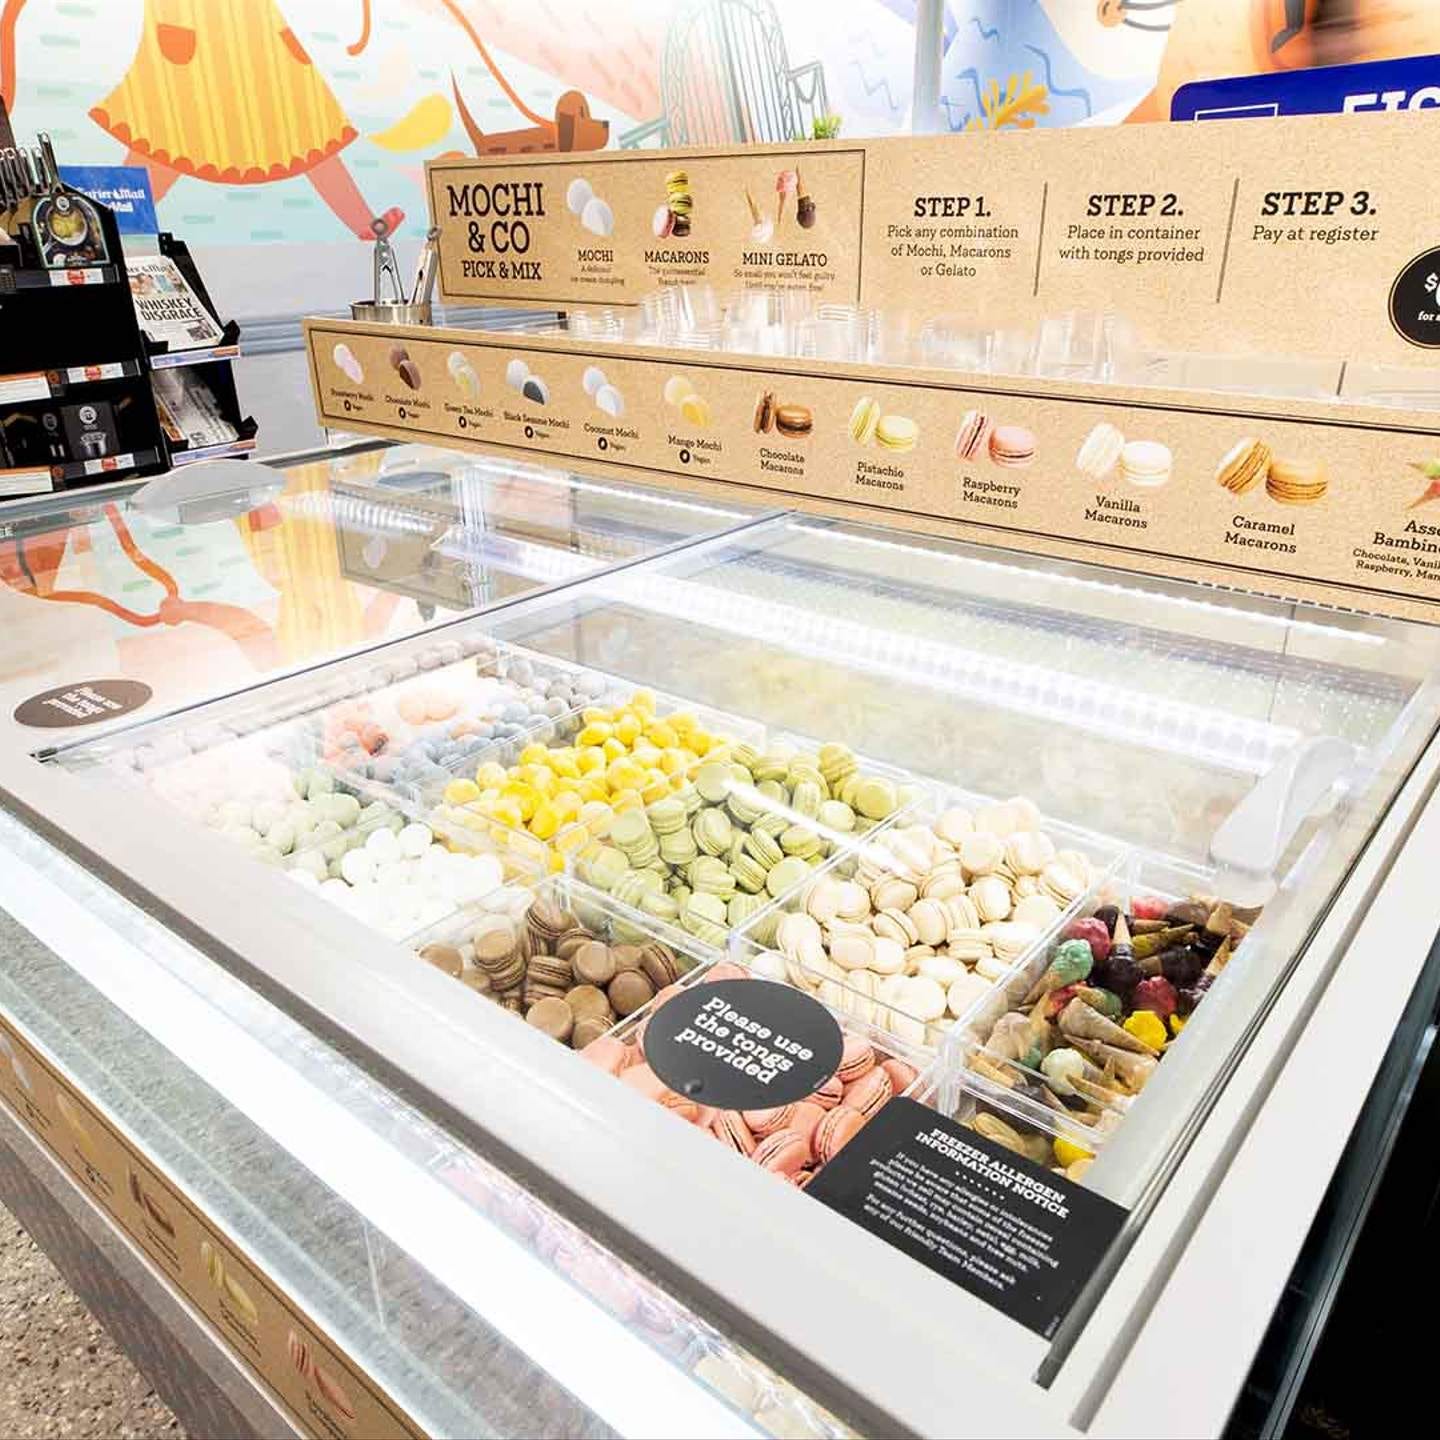 Coles' Fancy New Ascot Store Has a Mochi Ice Cream Bar and a Pick-and-Mix  Pet Treat Station - Concrete Playground